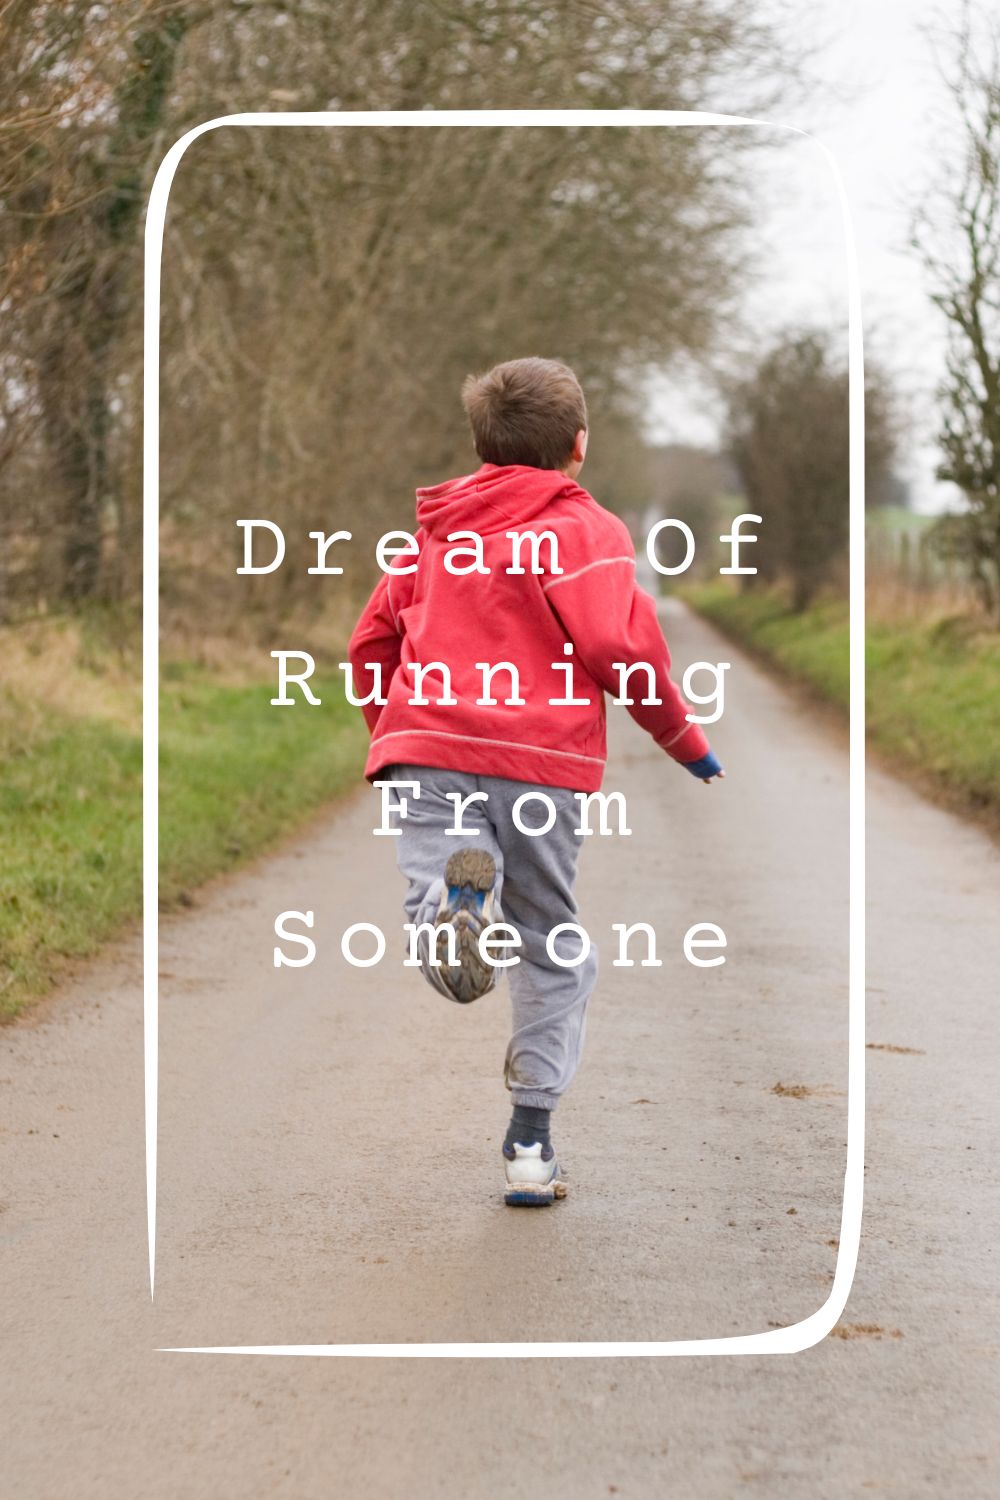 Dream Of Running From Someone Meanings 2